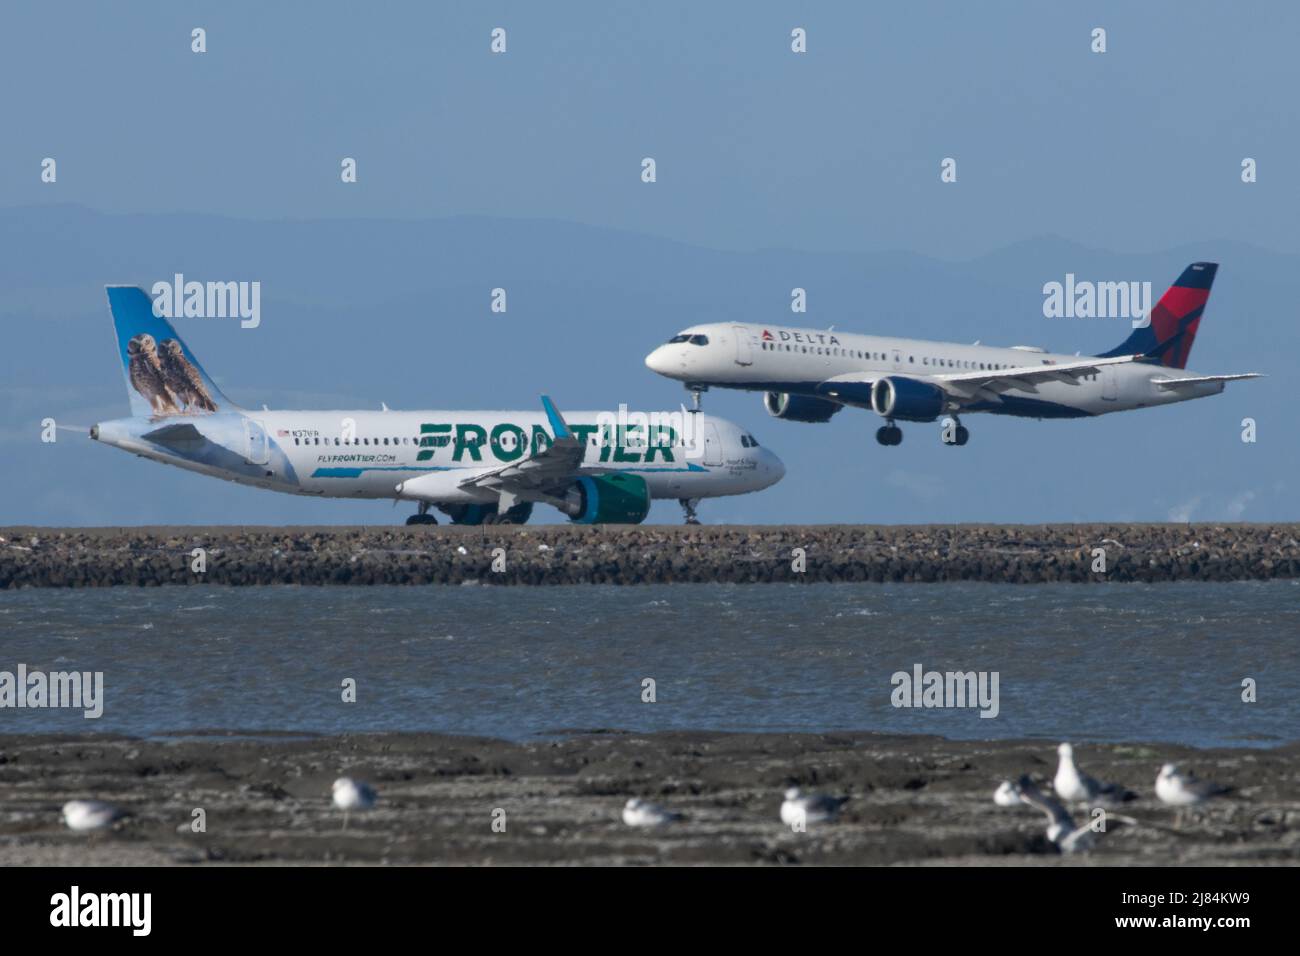 Two planes , from Delta and Frontier airlines, passing each other in San Francisco international airport in California. Seagulls perch nearby. Stock Photo